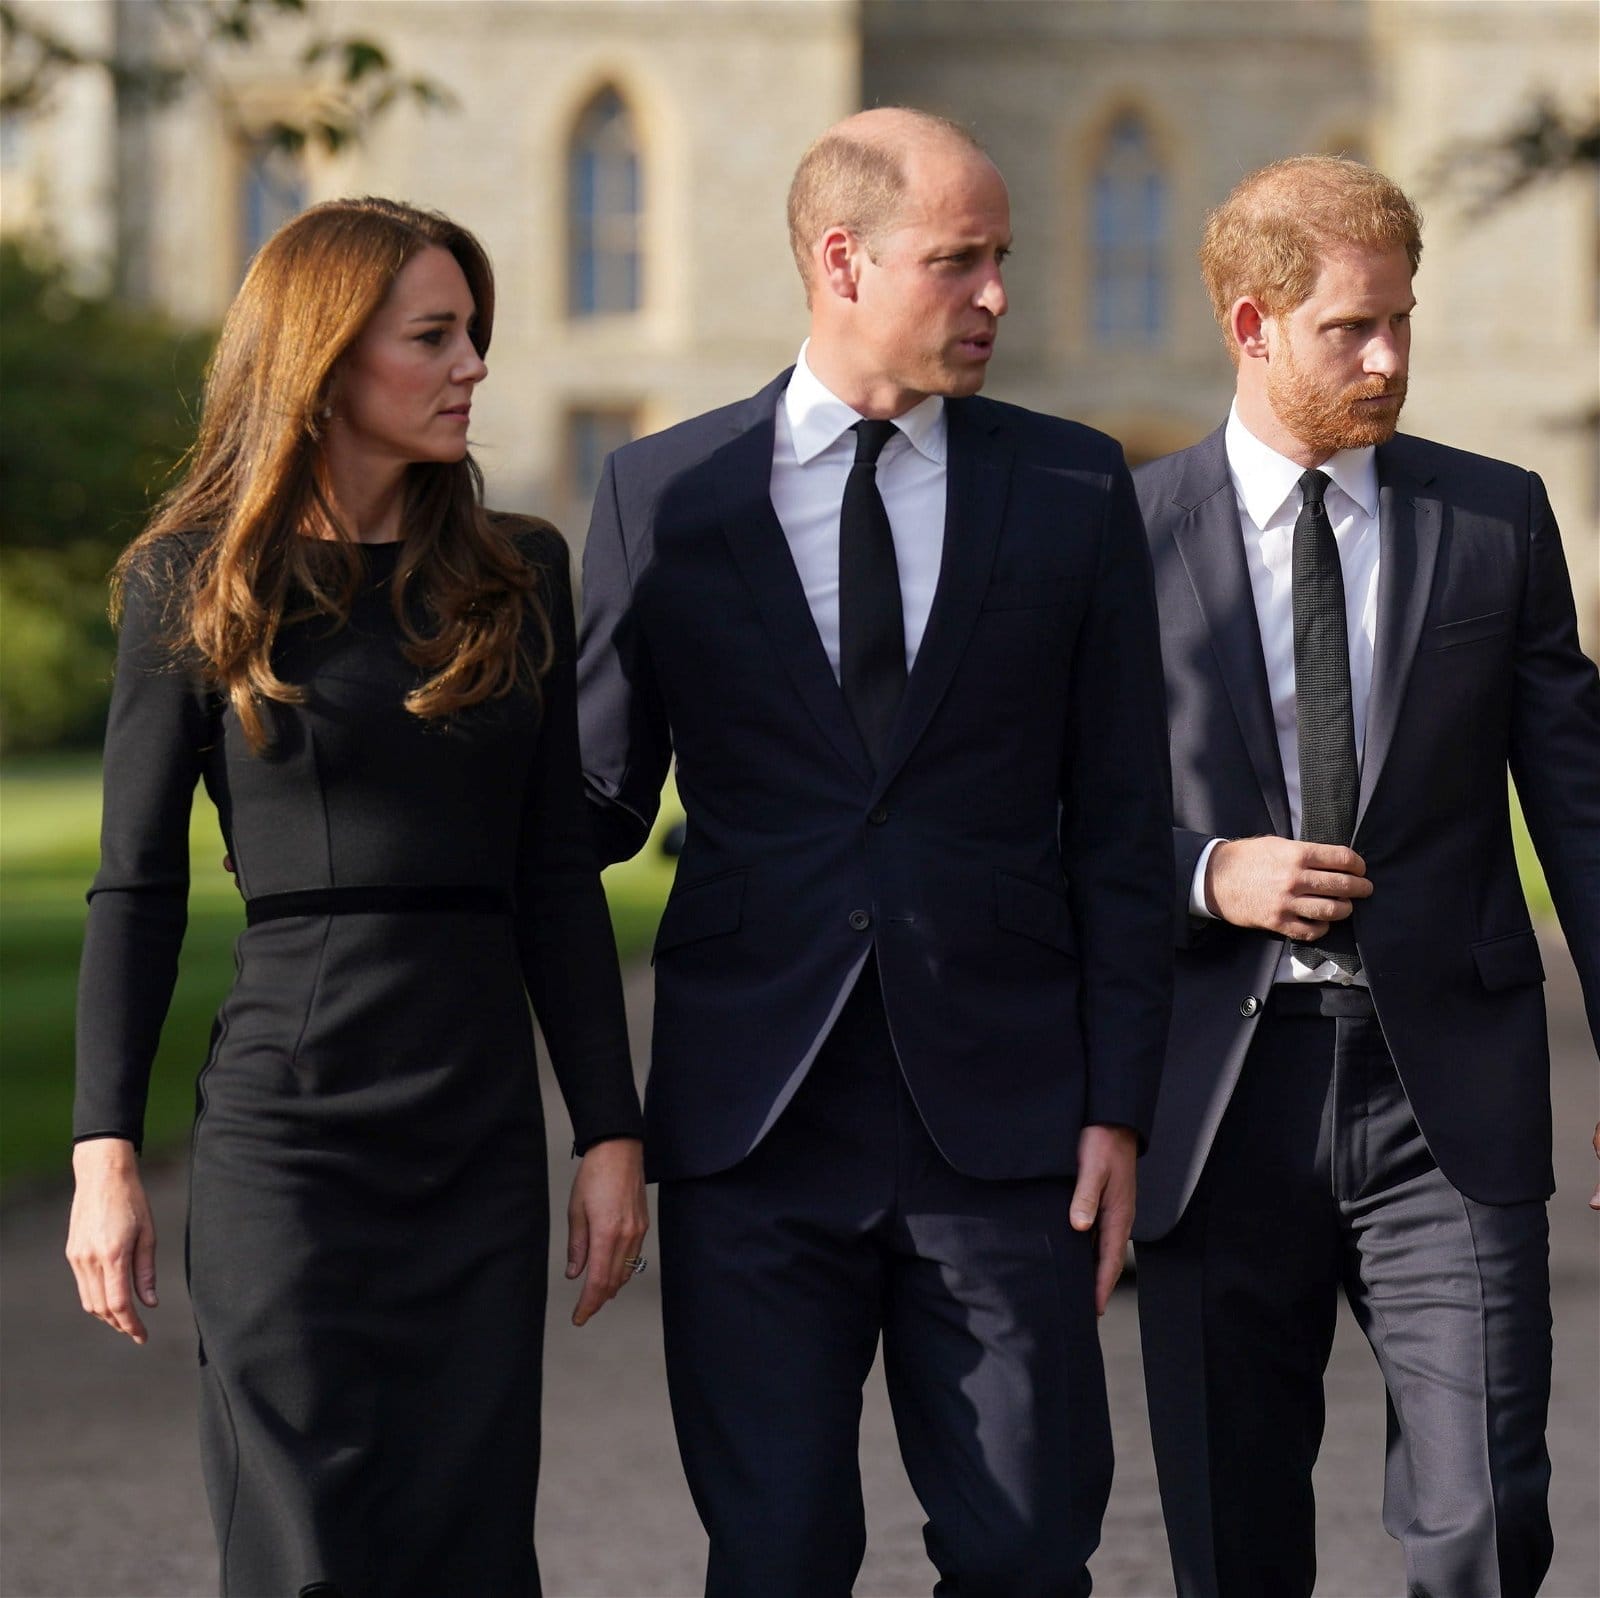 The Duke and Duchess of Sussex’s spokesperson made a point to distance them from the situation.